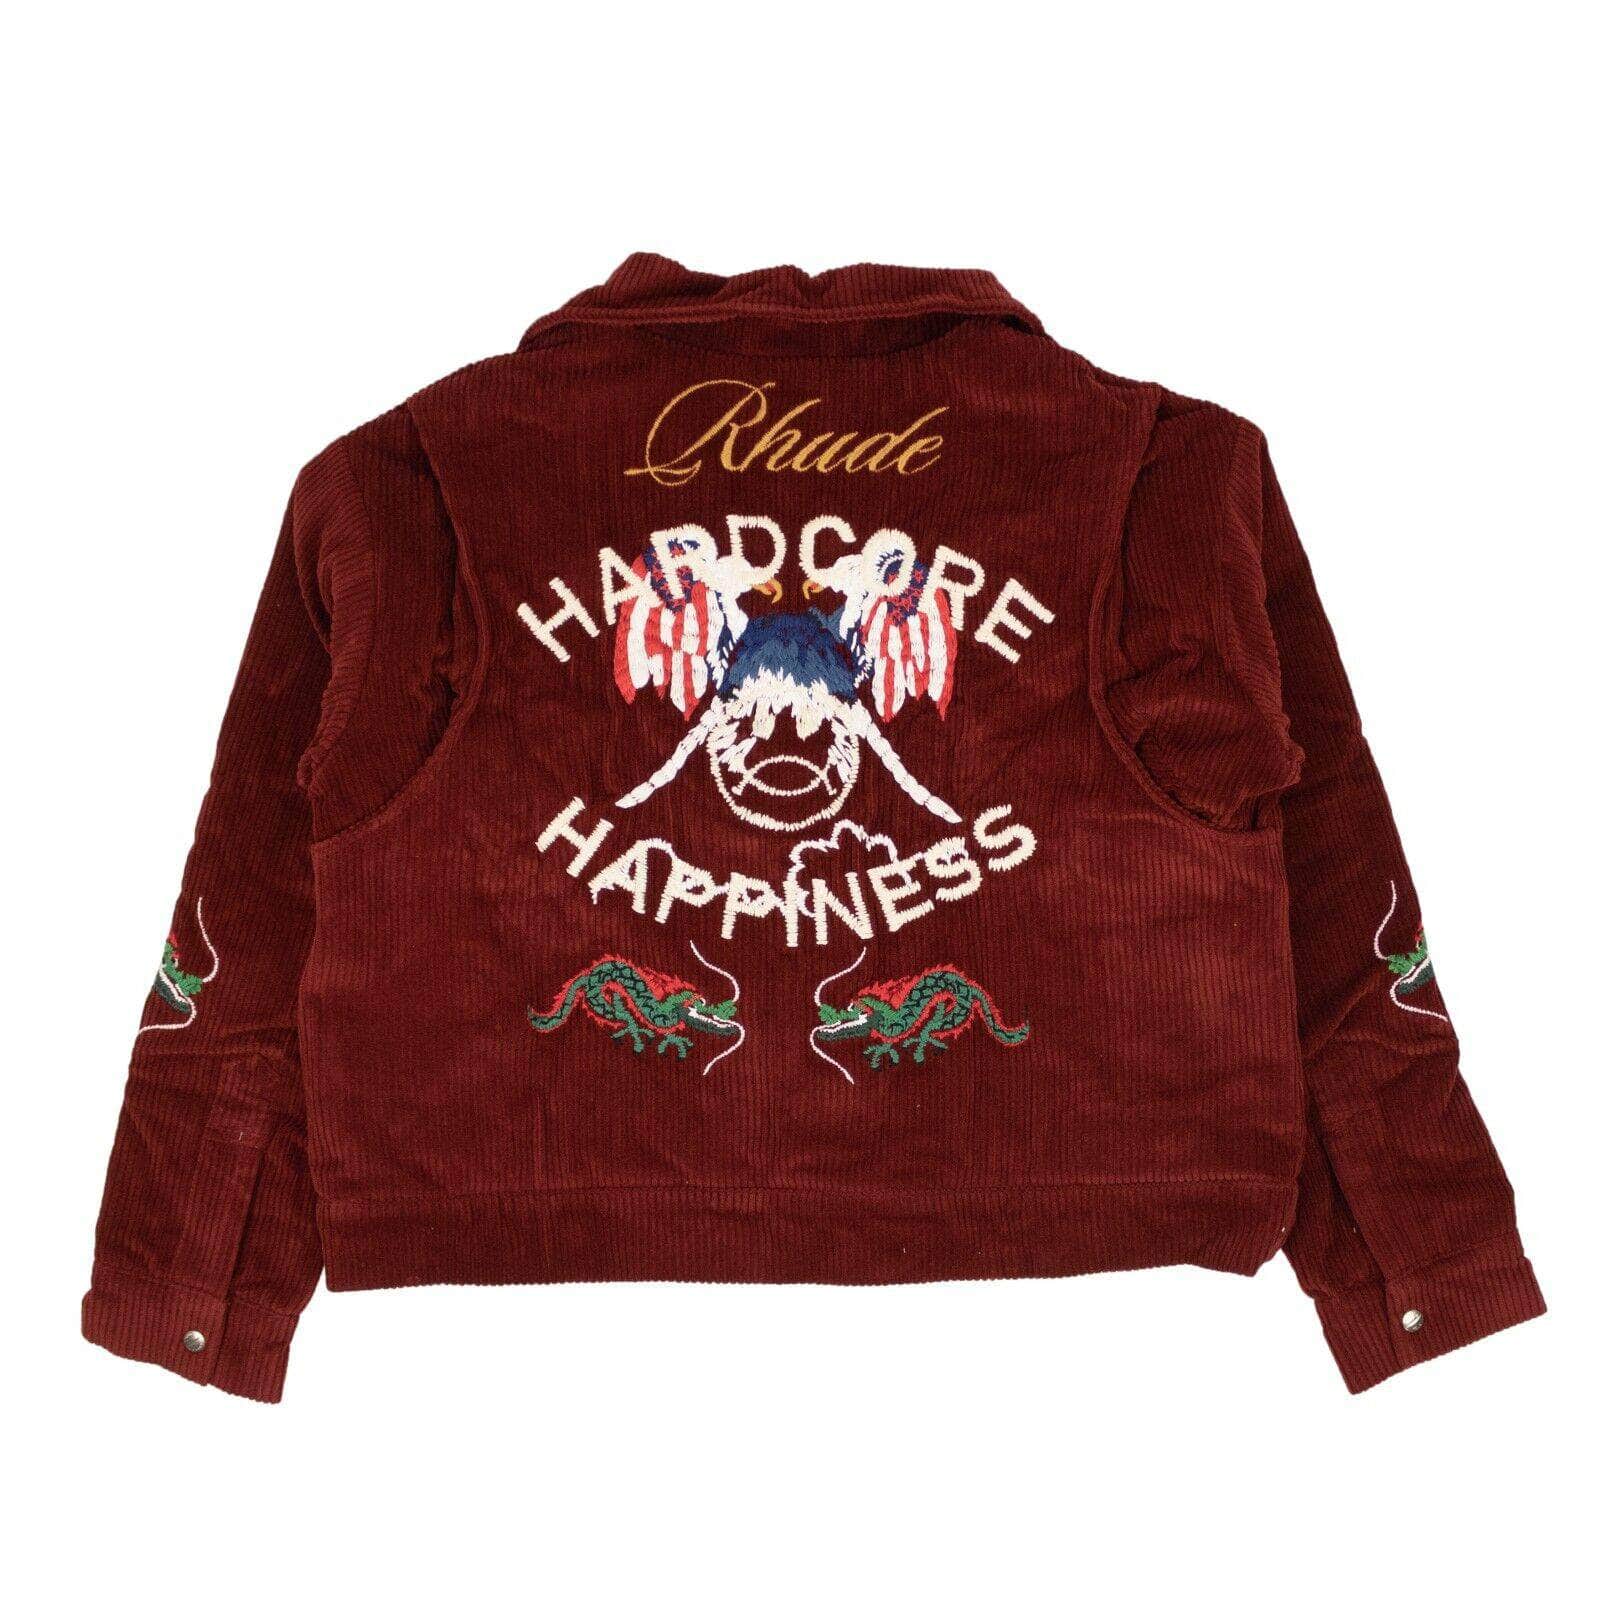 Rhude 1000-2000, channelenable-all, chicmi, couponcollection, gender-mens, main-clothing, mens-shoes, mens-varsity-jackets, rhude, size-l Maroon Cotton Graphic Print Souvenir Jacket